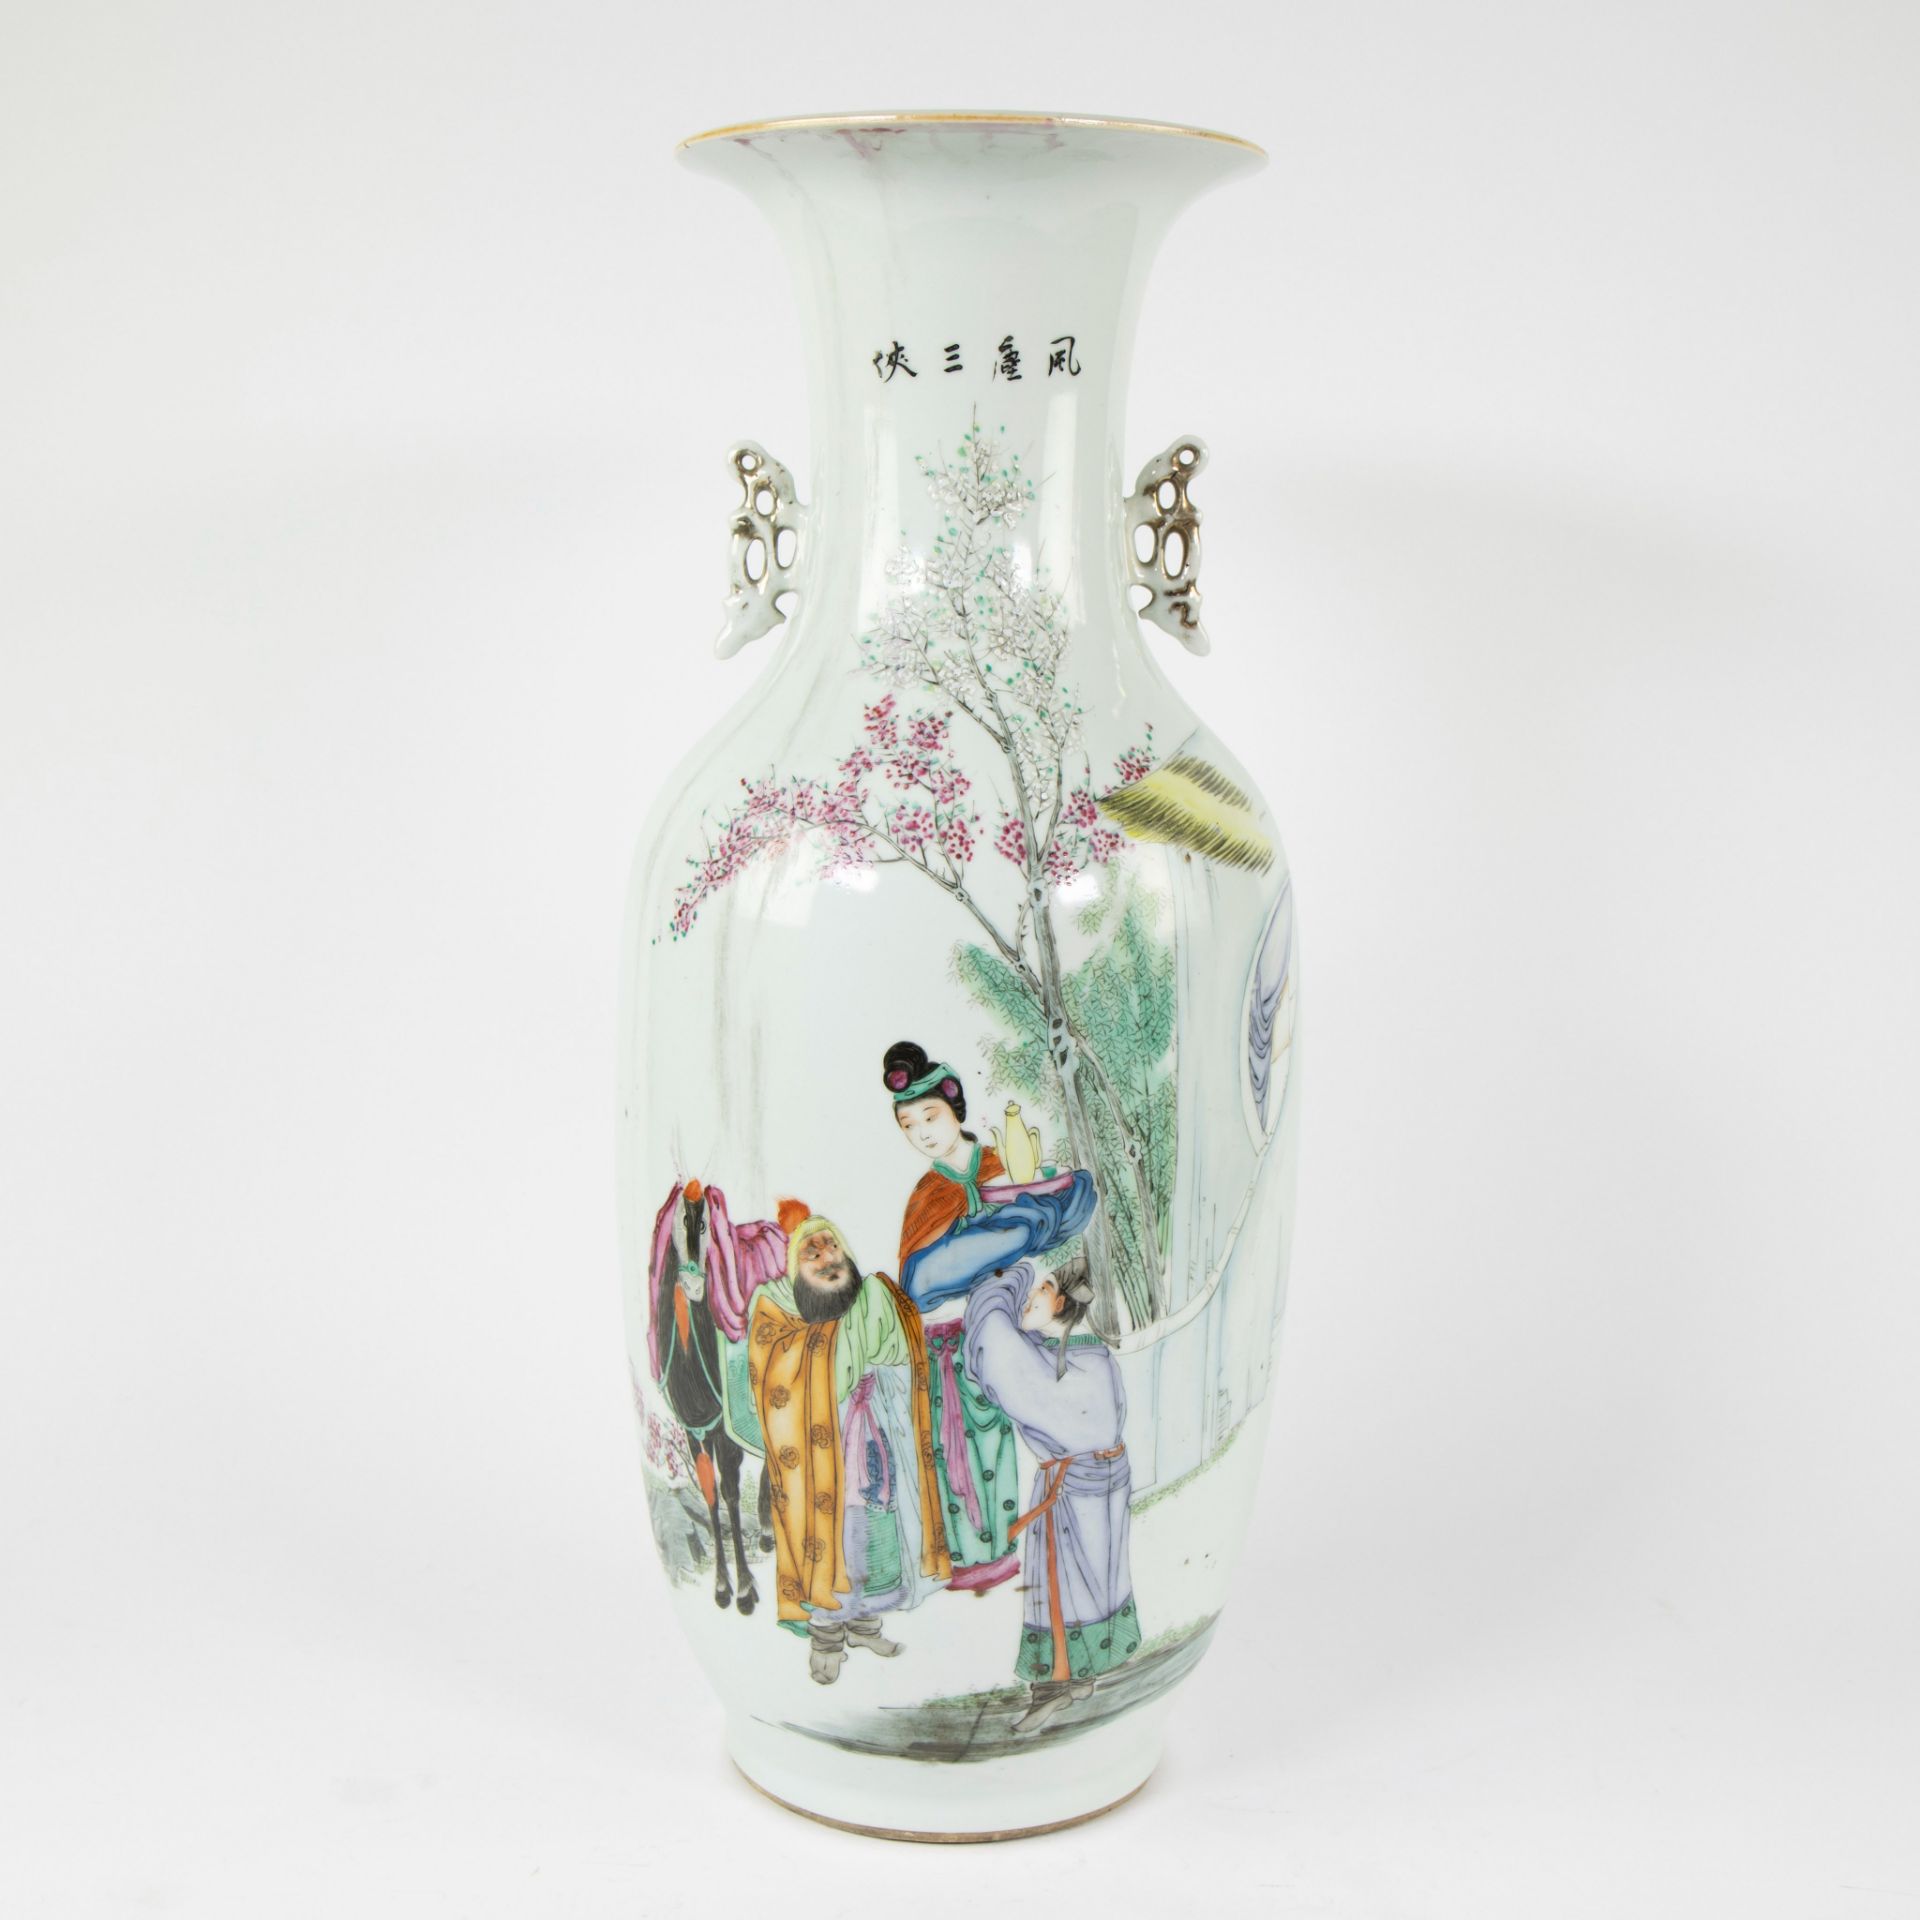 19th century Chinese famille rose vase decorated with figures and Chinese texts